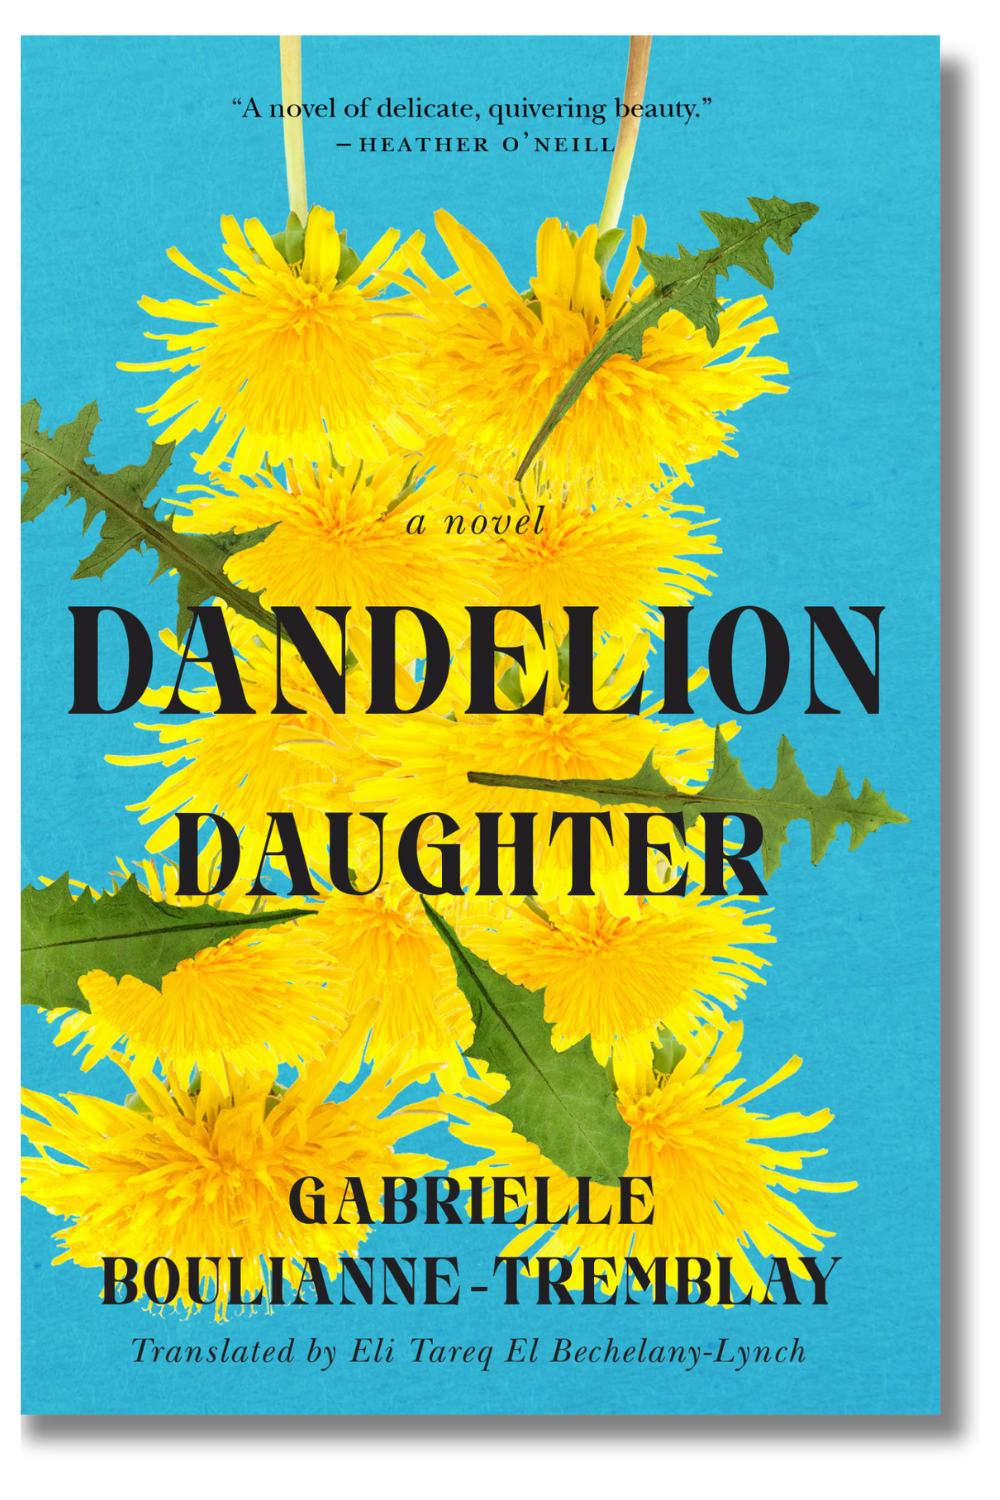 The cover of "Dandelion Daughter" by Gabrielle Boulianne-Tremblay, translated by Eli Tareq El Bechelany-Lynch